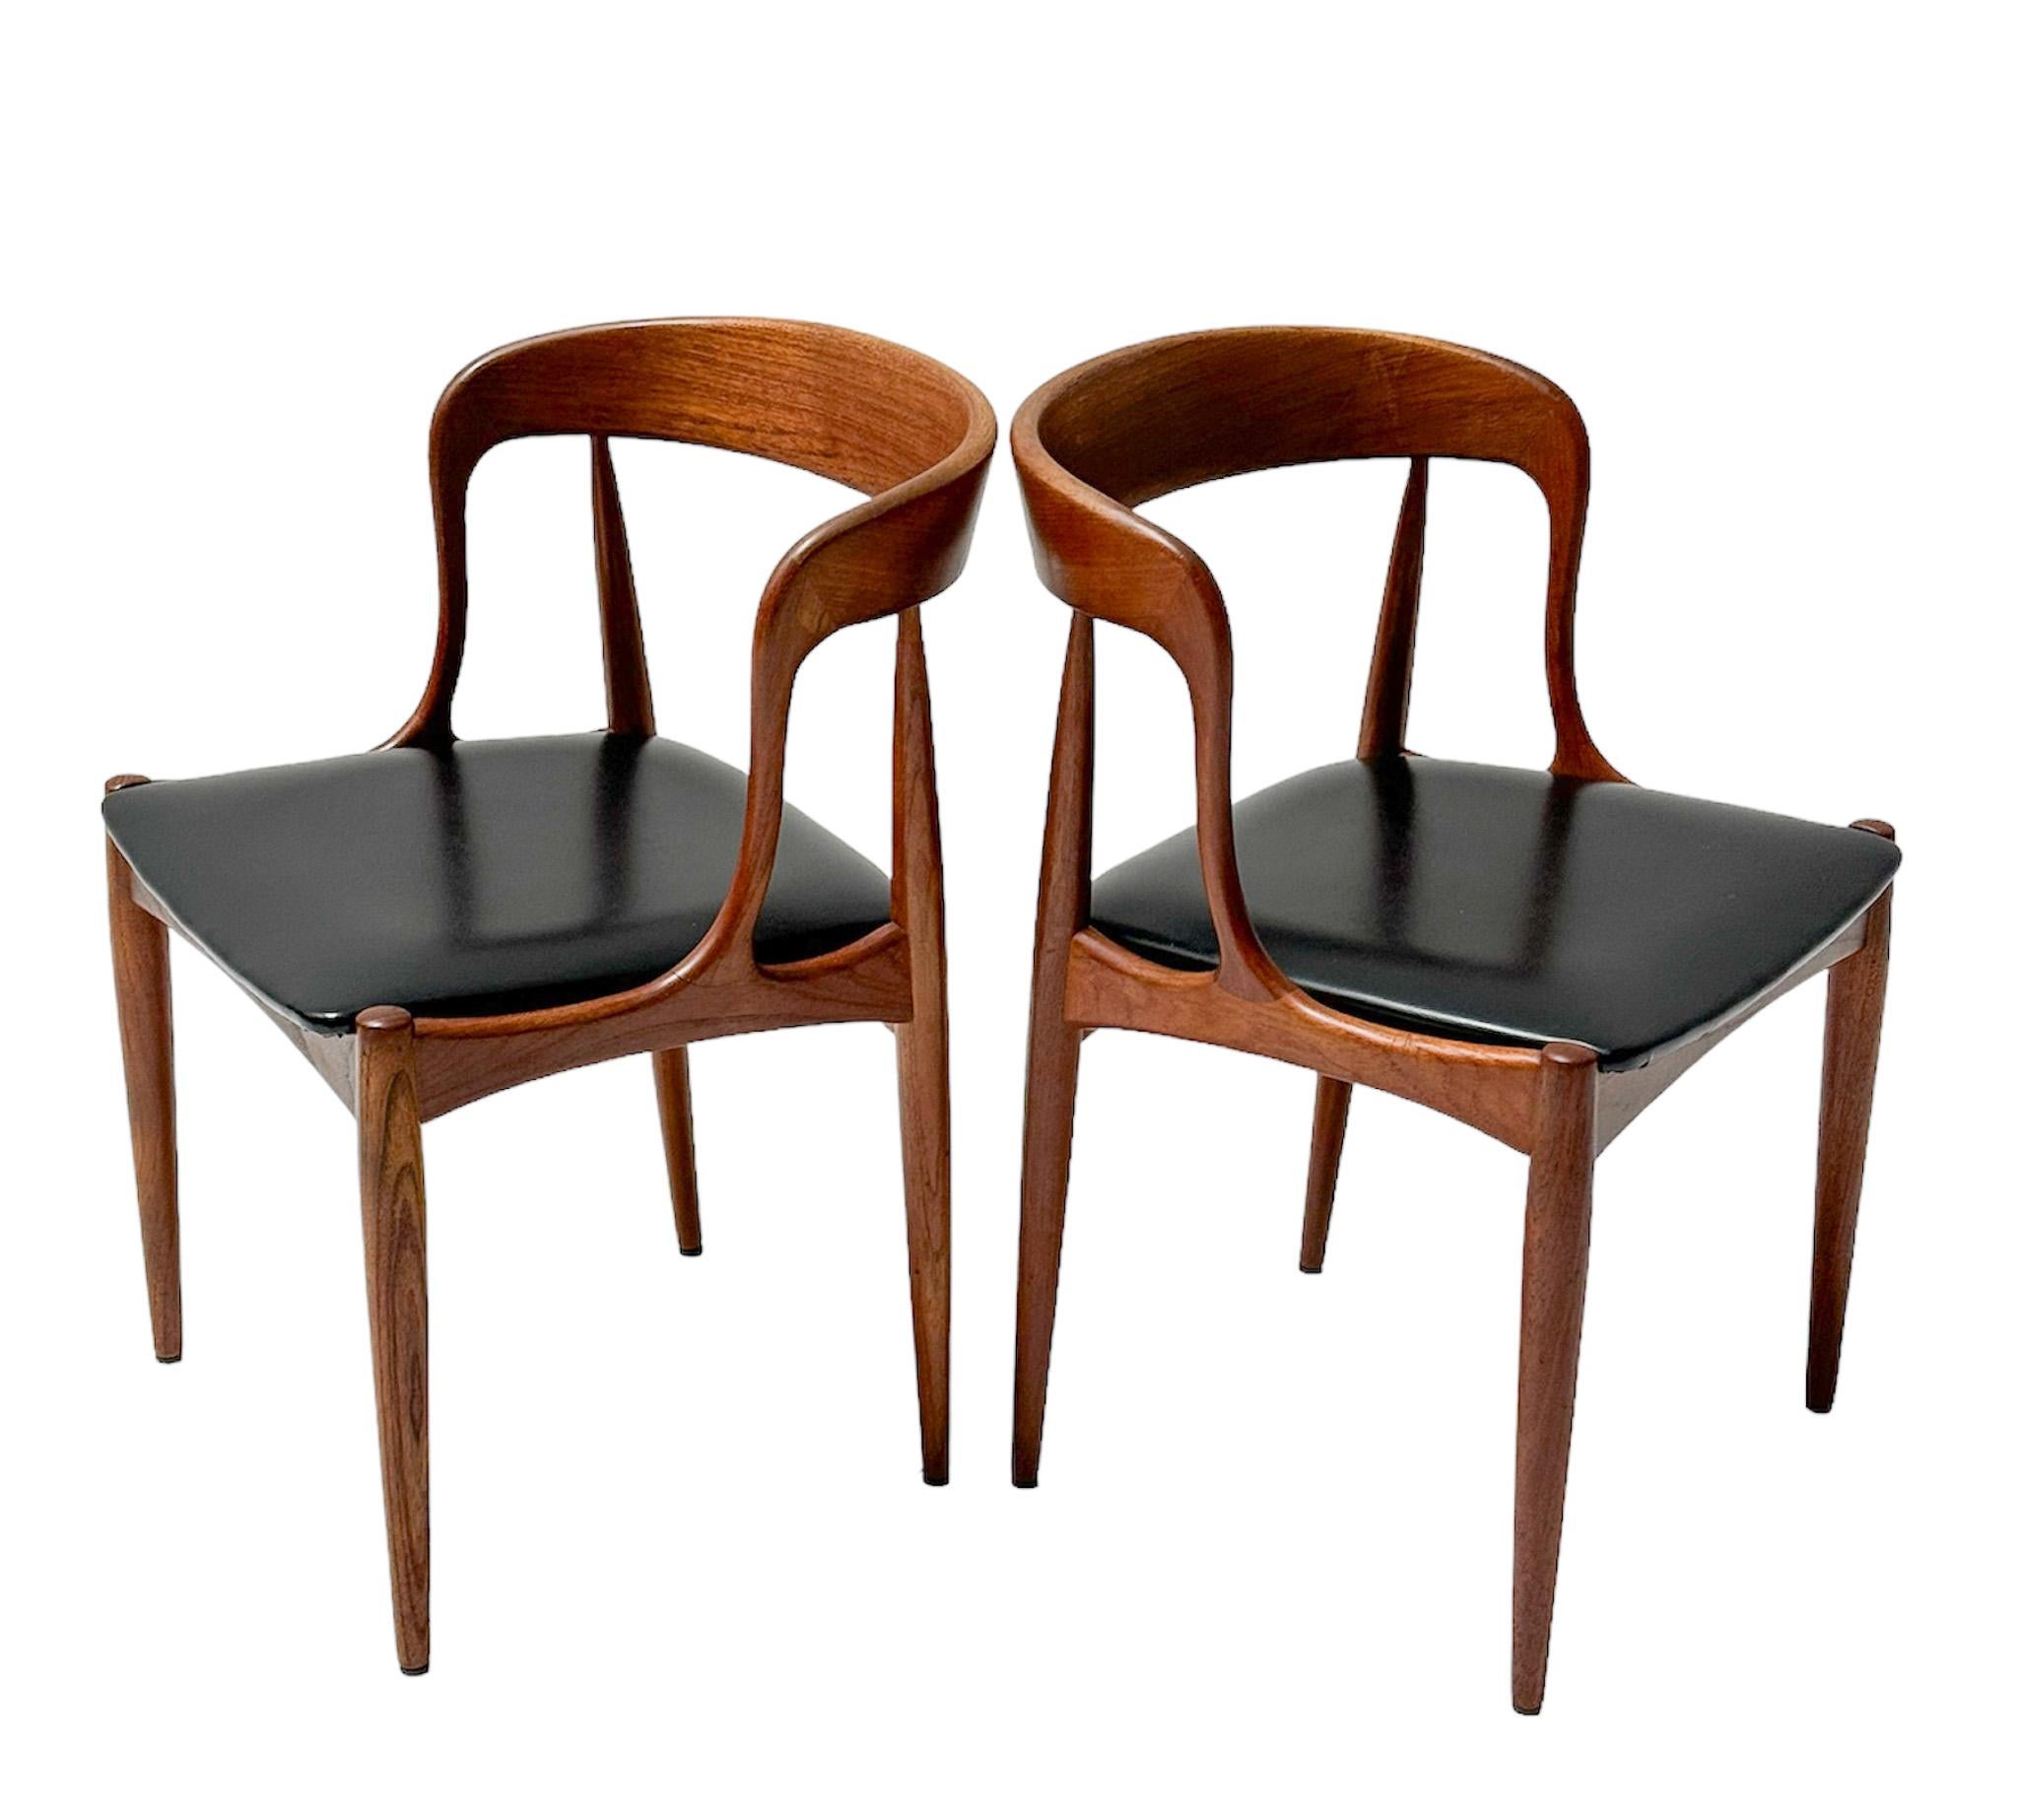 Four Teak Mid-Century Modern Dining Chairs by Johannes Andersen for Uldum, 1960s For Sale 1